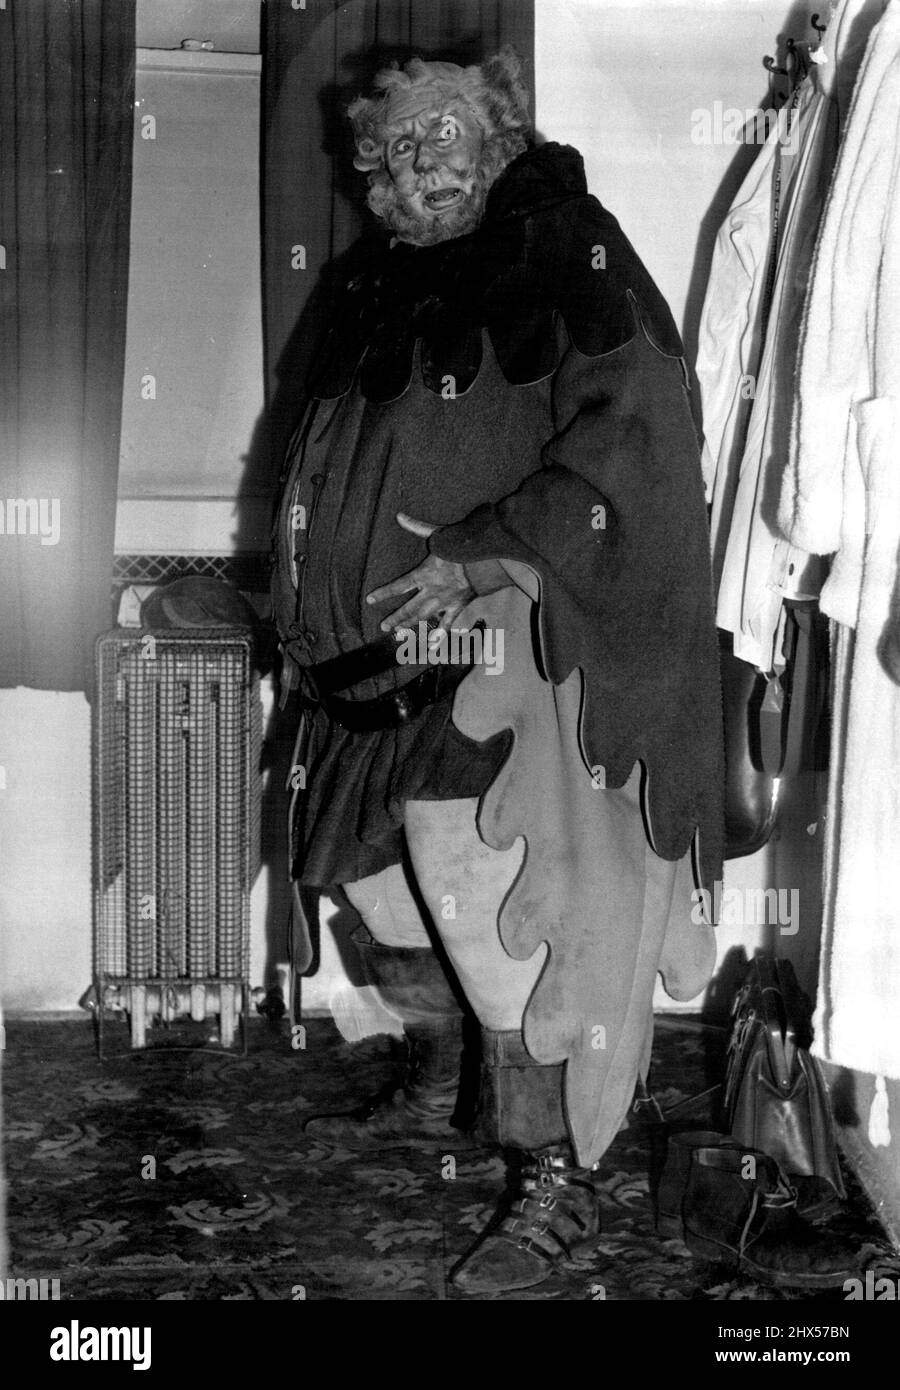 Anthony Quayle -- FAT. He emerges from his dressing - room as 22-st., wheezy, blustering 65-year-old Falstaff. May 10, 1953. Stock Photo